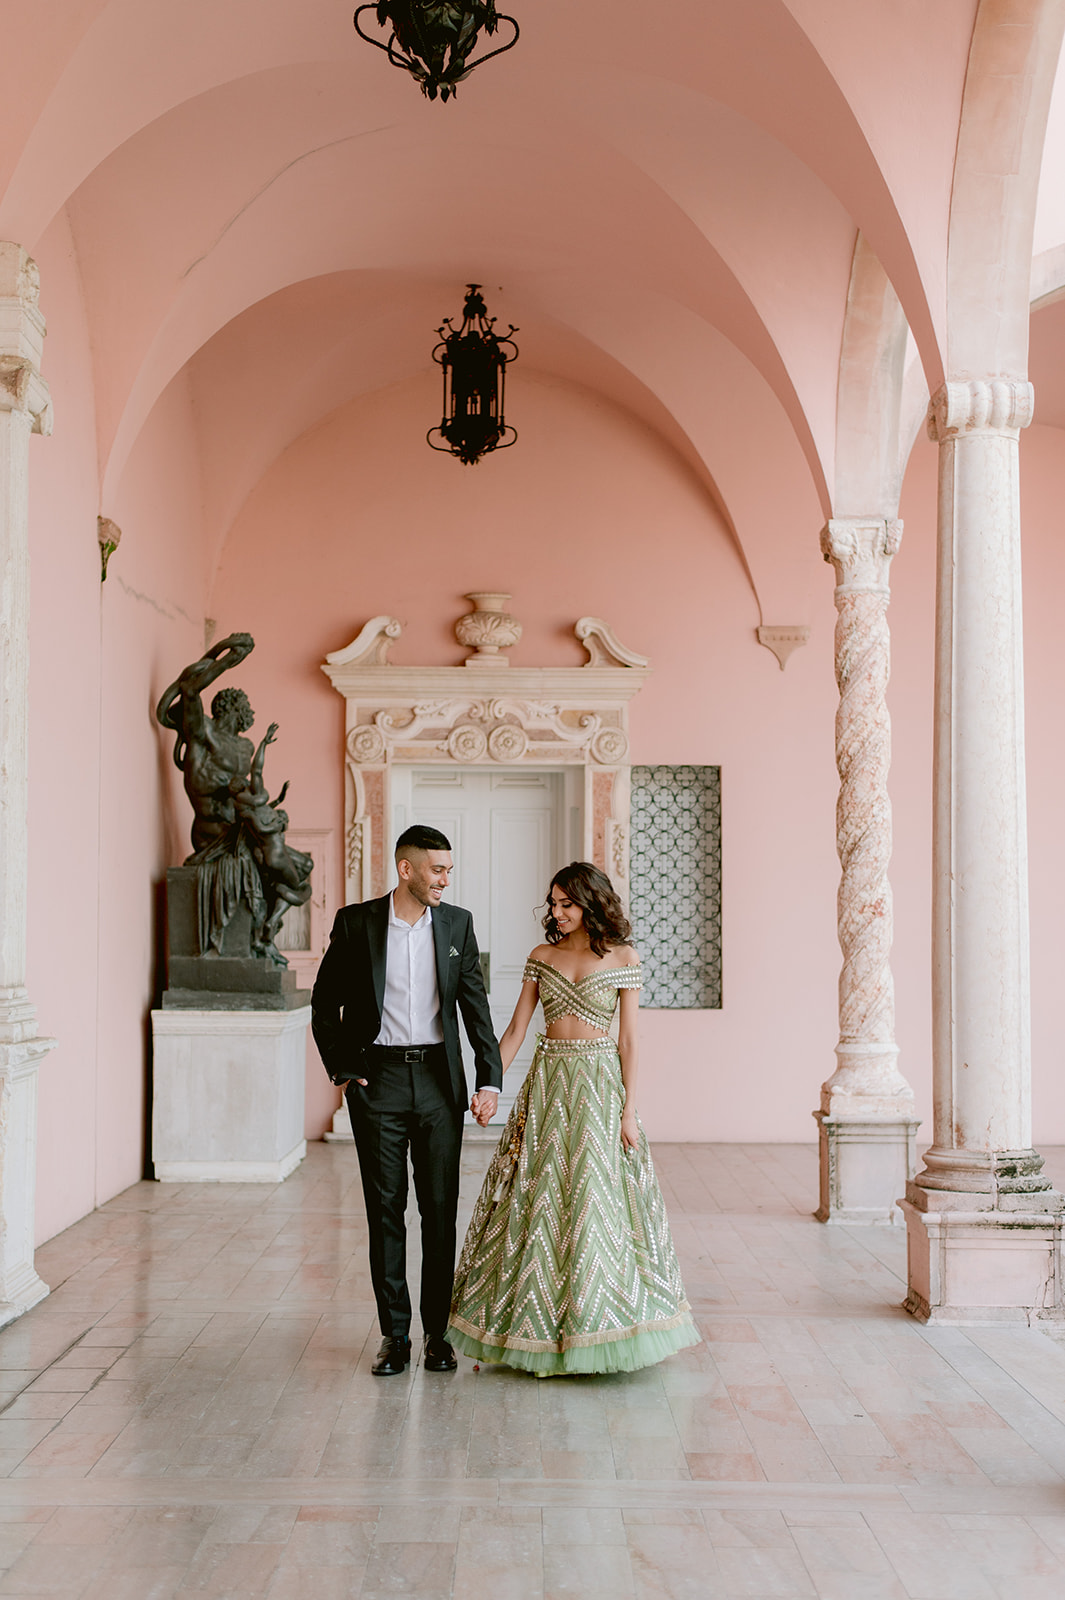 "Ringling Museum engagement shoot with gorgeous architectural details"
